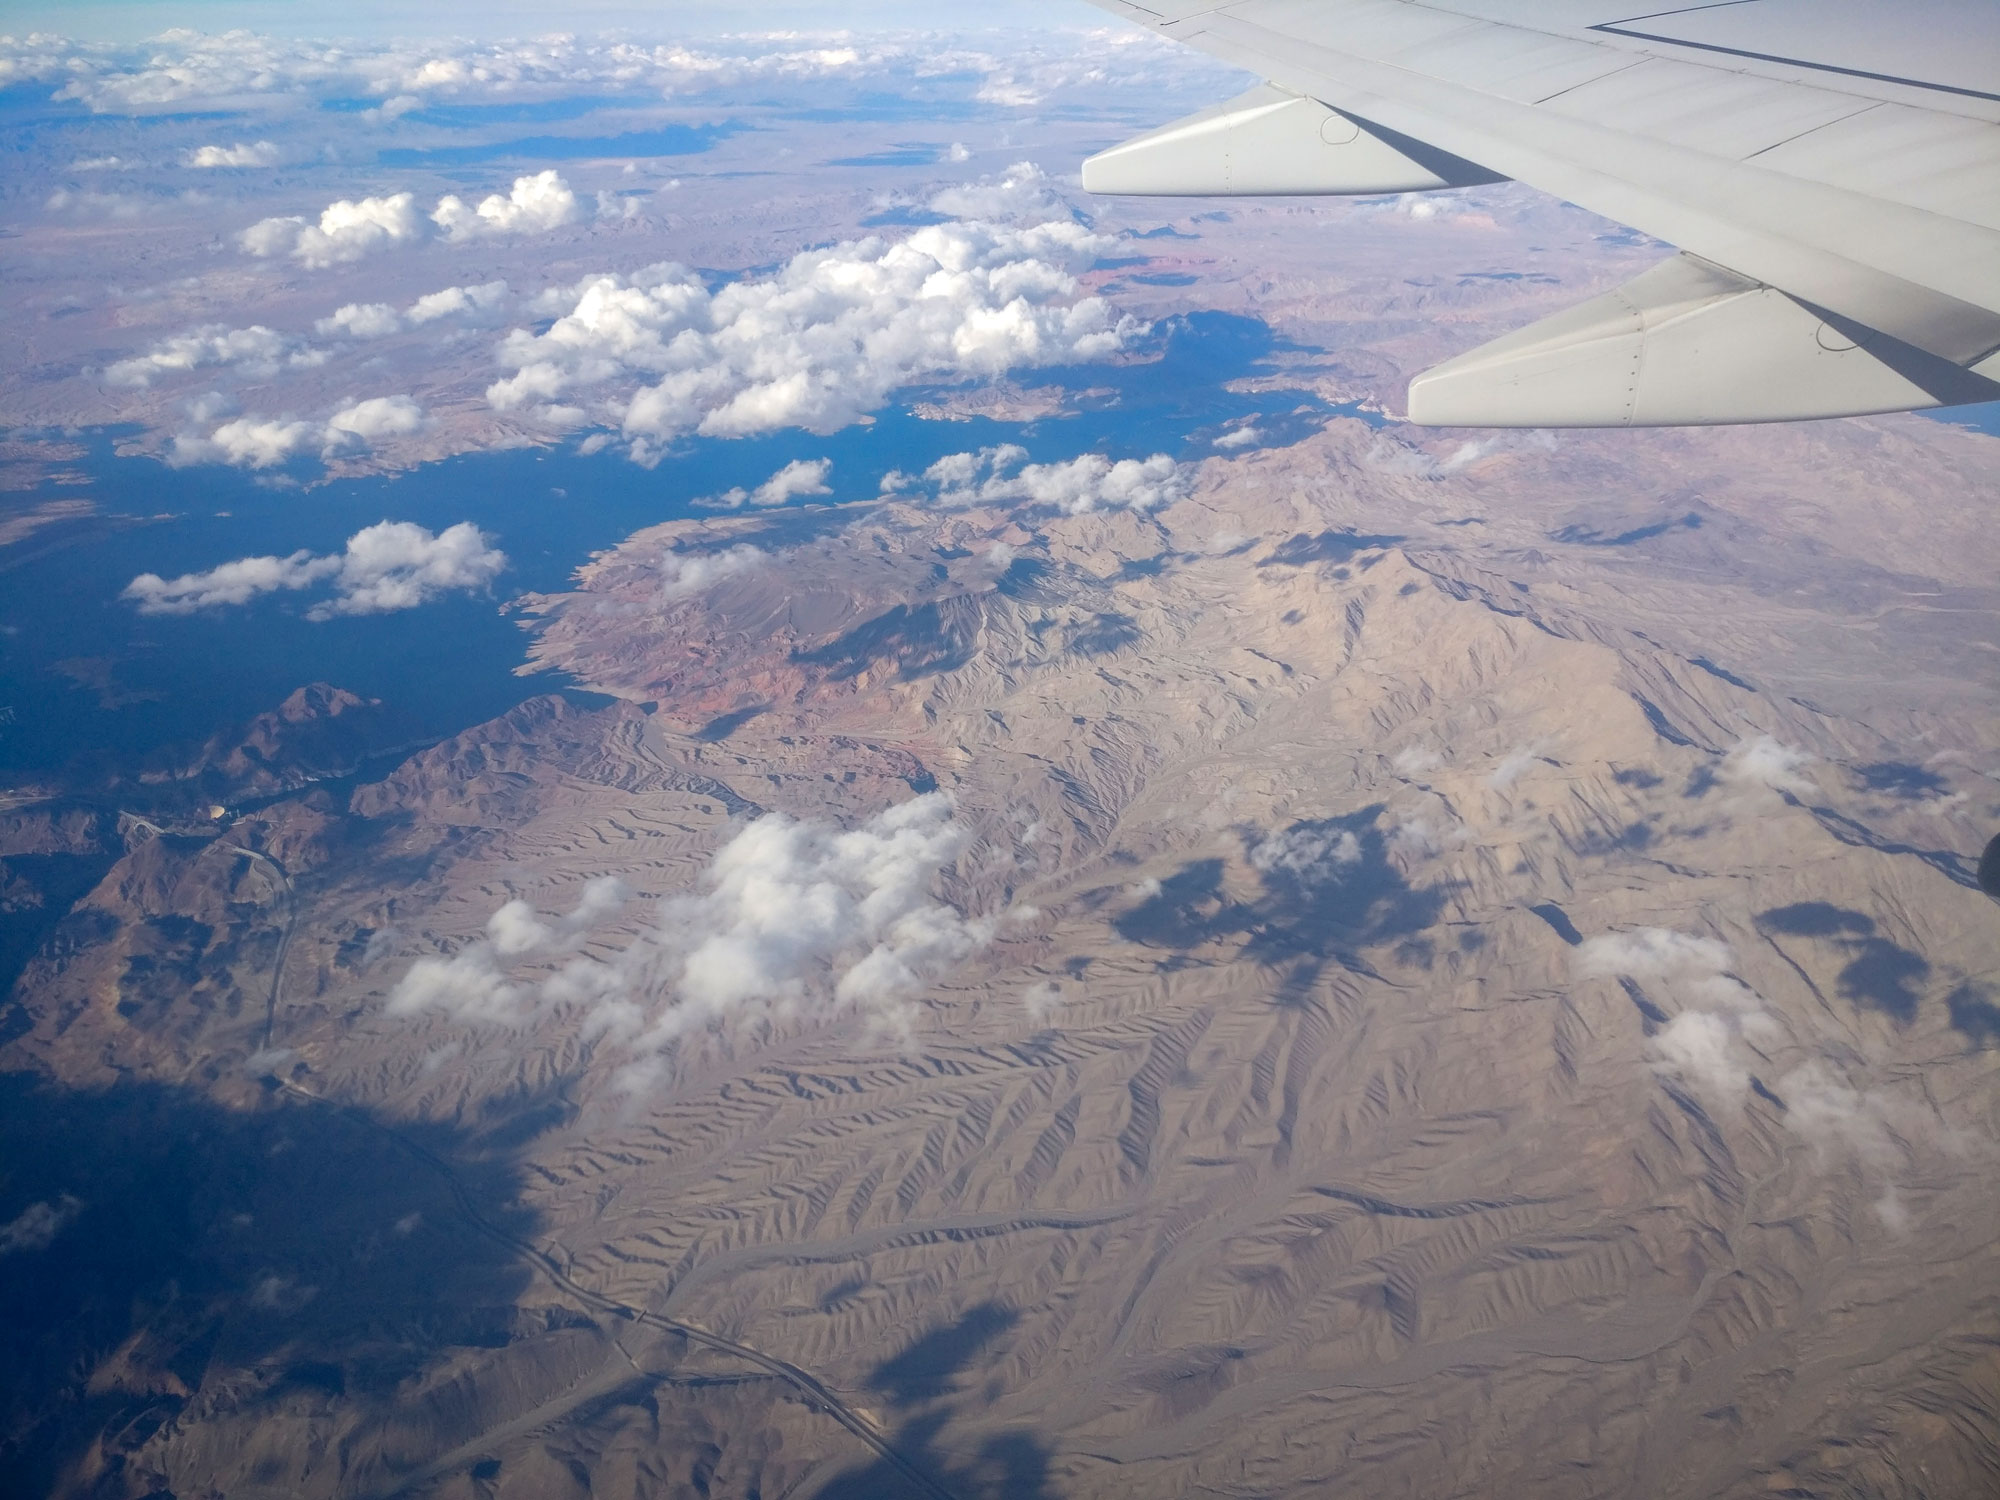 View out of an airplane window over mountains